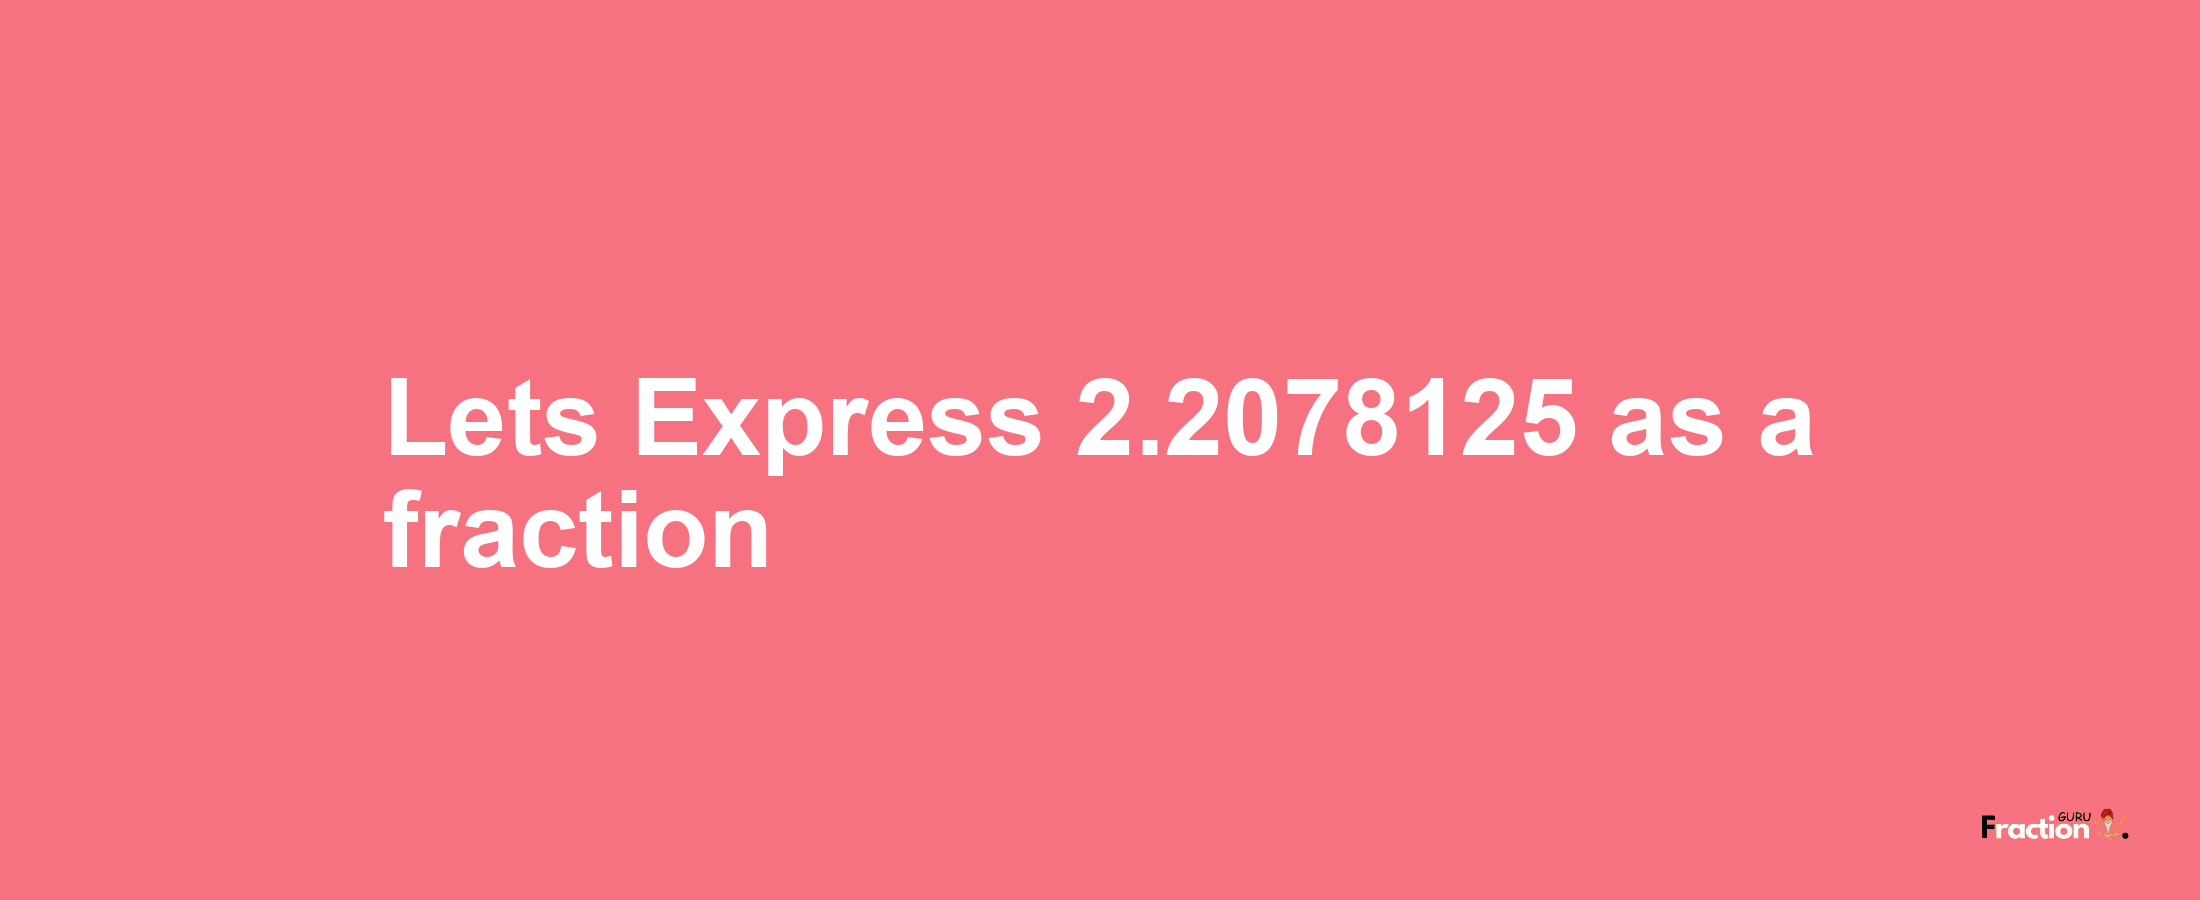 Lets Express 2.2078125 as afraction